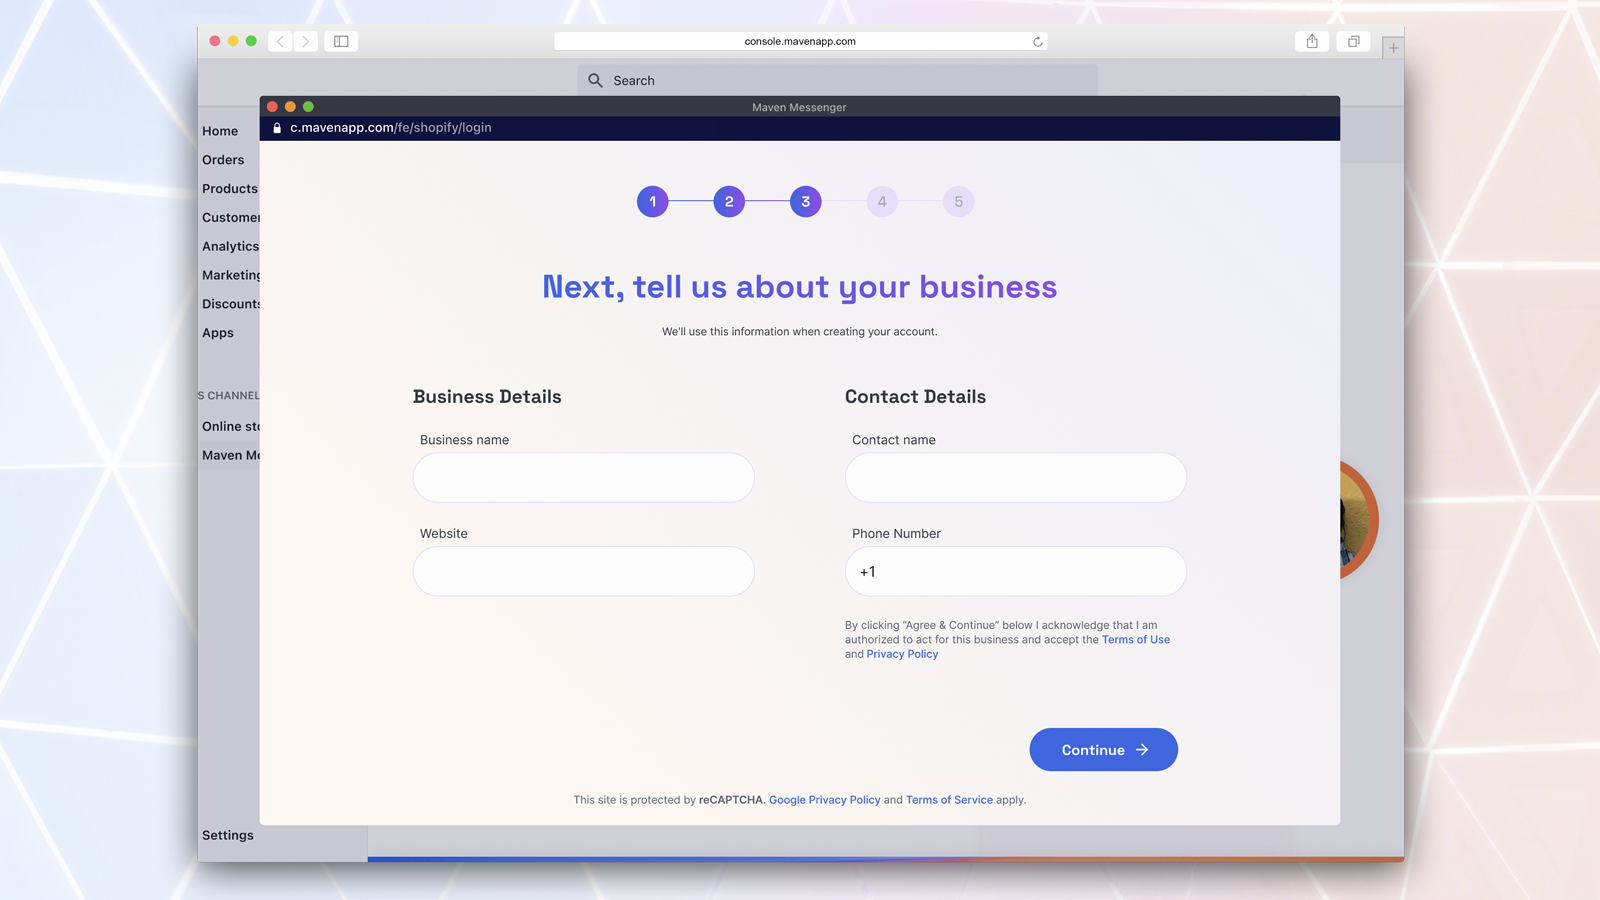 Quick and easy onboarding that only takes minutes to go live.